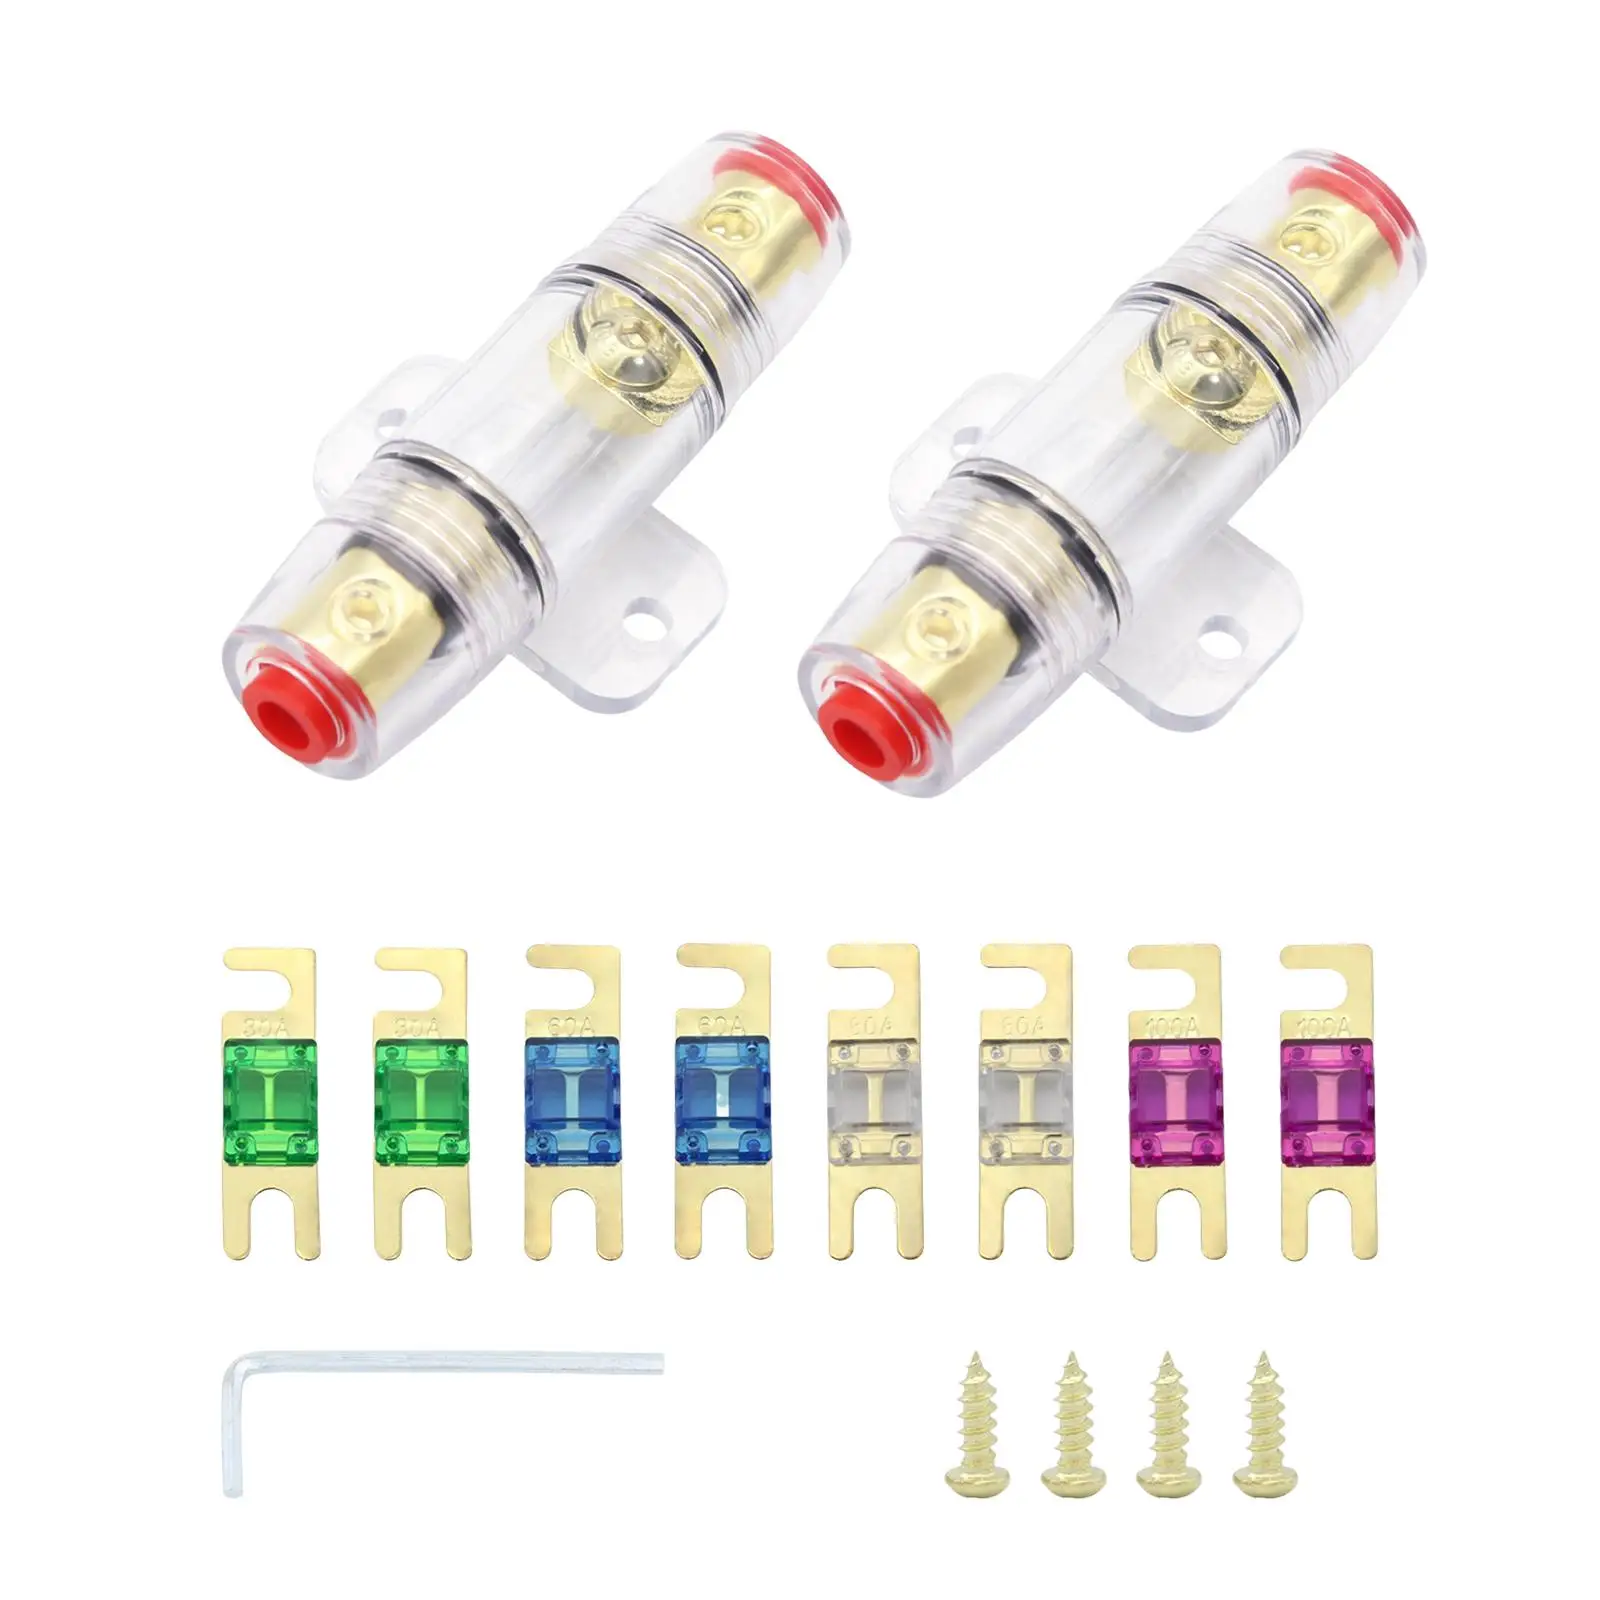 2 Pieces Mini Anl Fuse Holder Set for Car Stereo, Compressor for Car Marine Boat Motor Replacement with 30A 60A 80A 100A Fuses